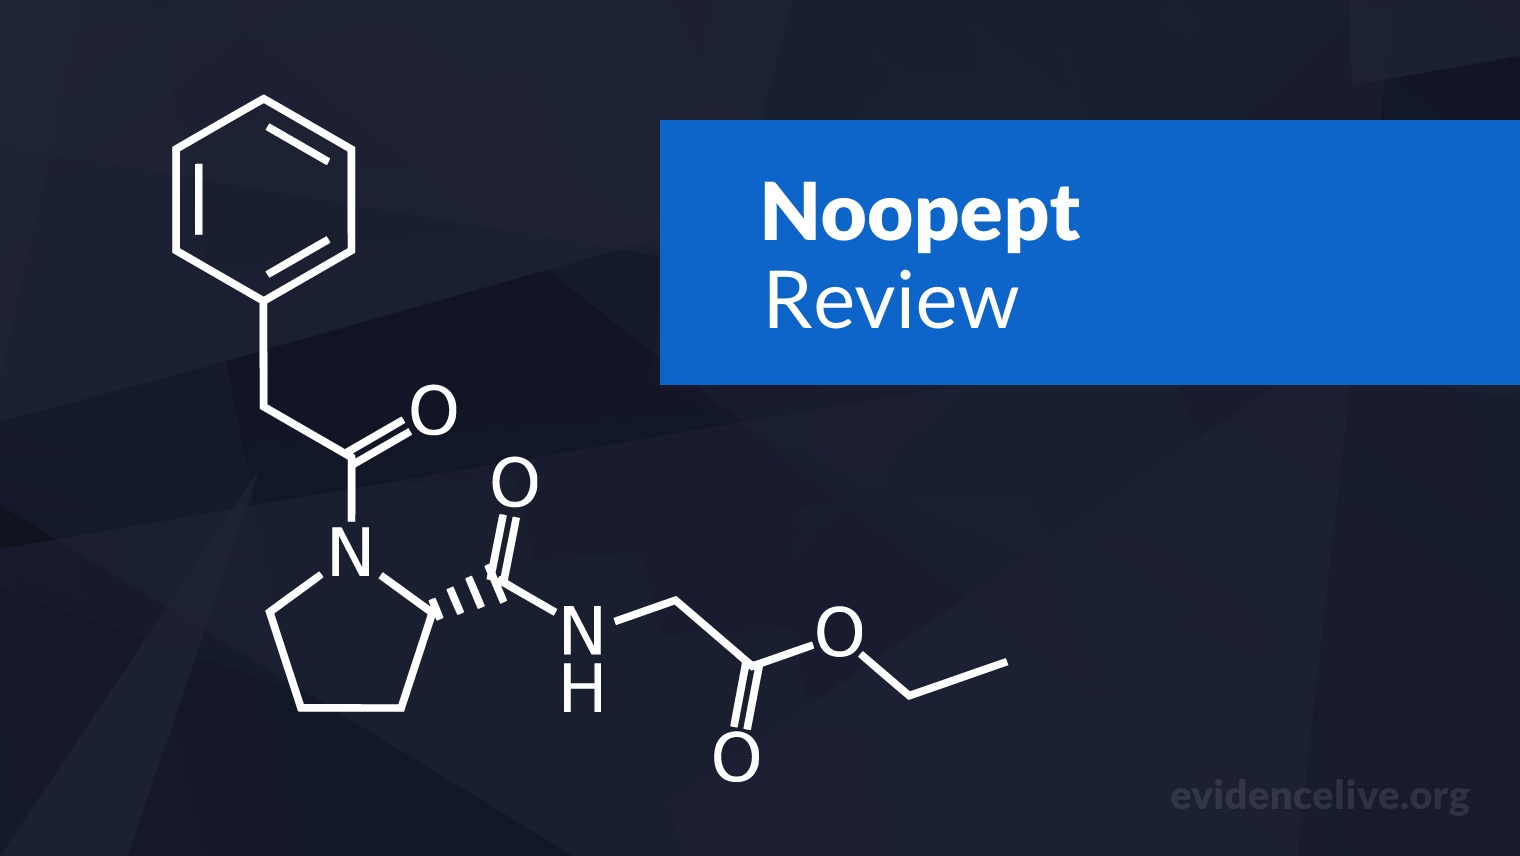 Noopept: Benefits, Uses, Dosage, and Side Effects